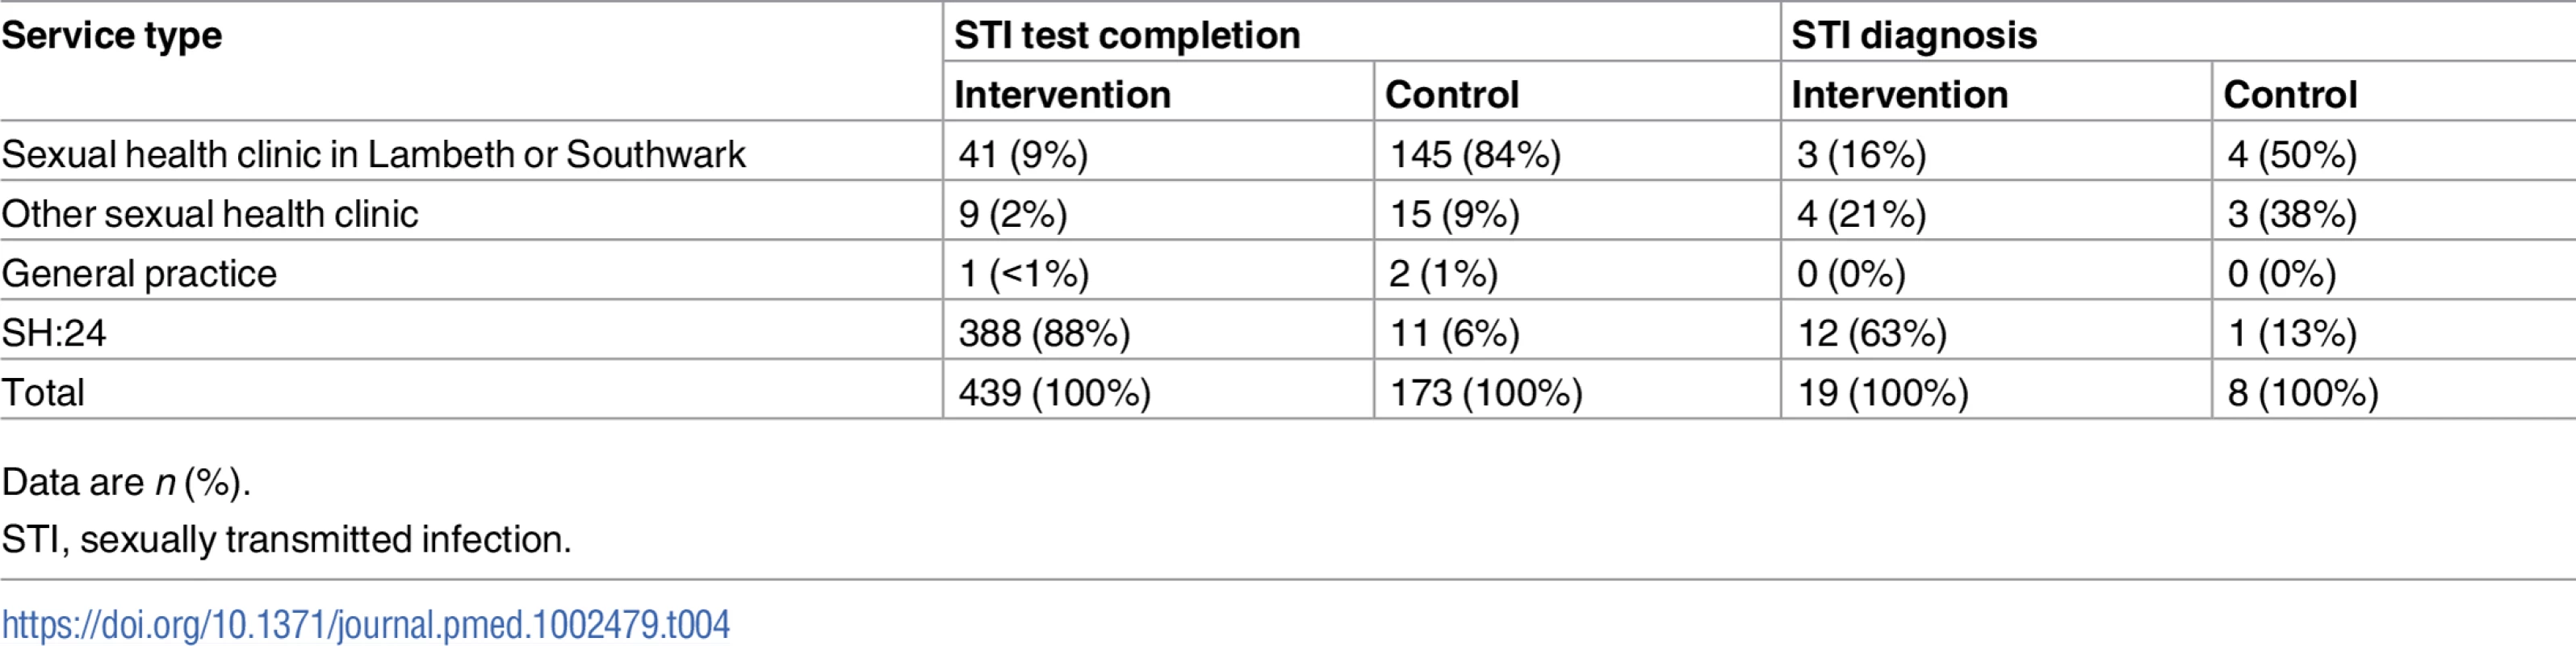 STI test completion and STI diagnoses by service type.